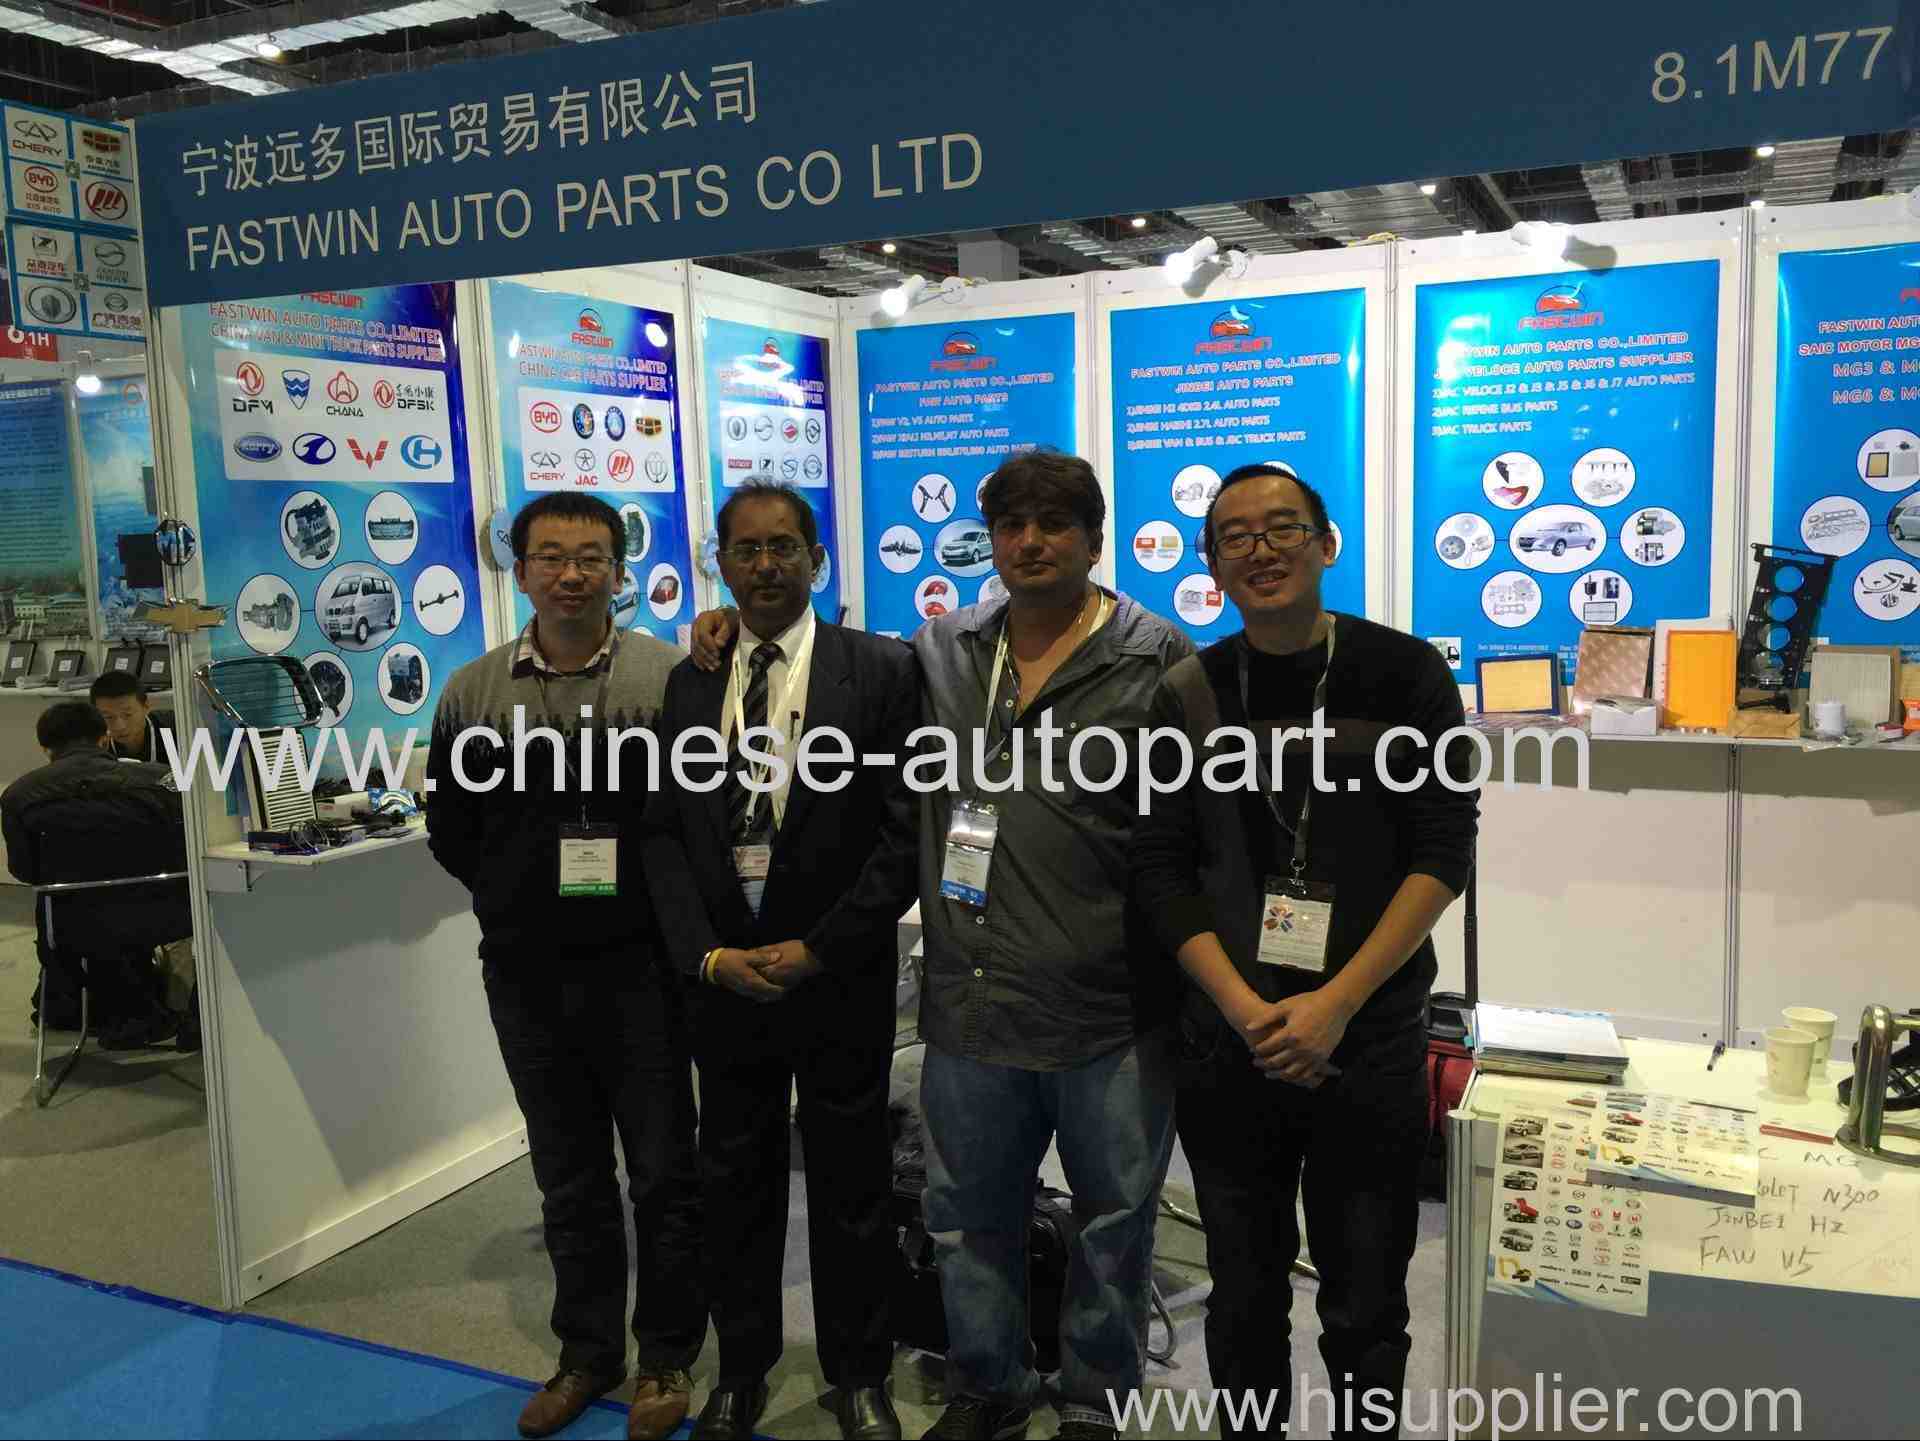 FASTWIN AUTO PARTS SHOW 2015 IN SHANGHAI